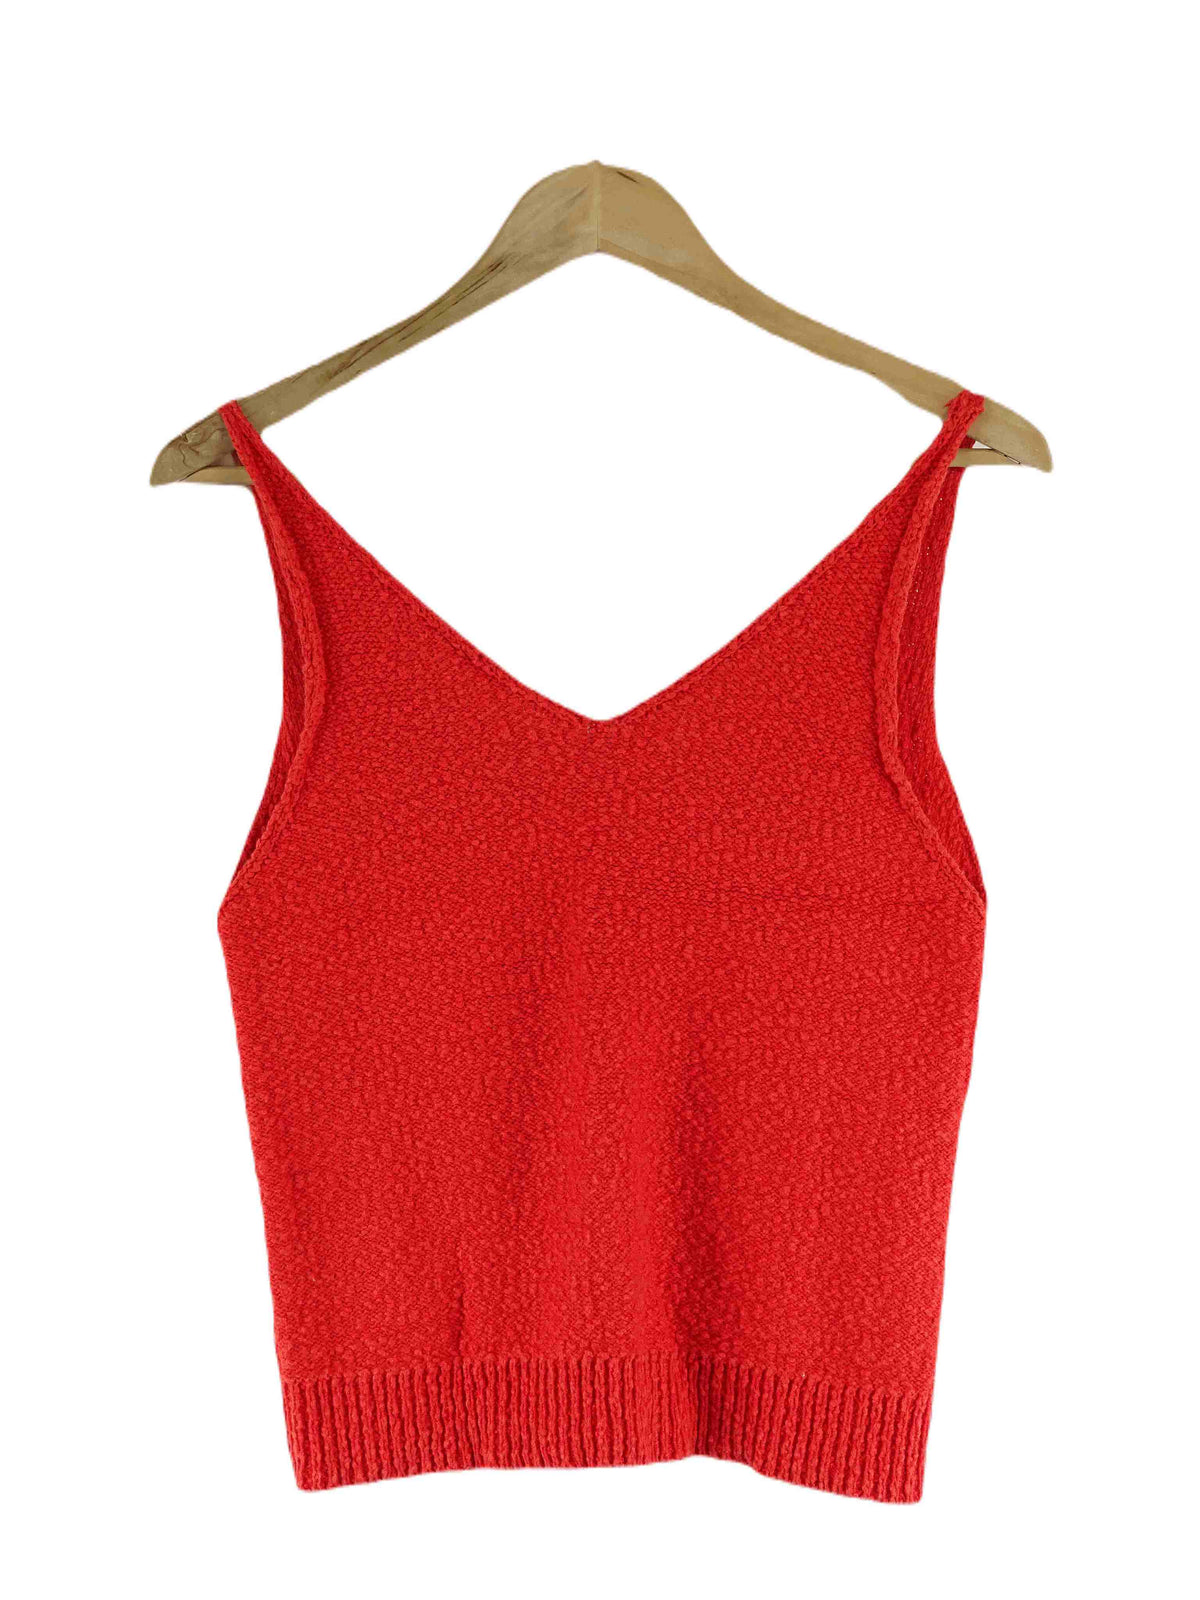 French Connection Orange Knit Singlet S